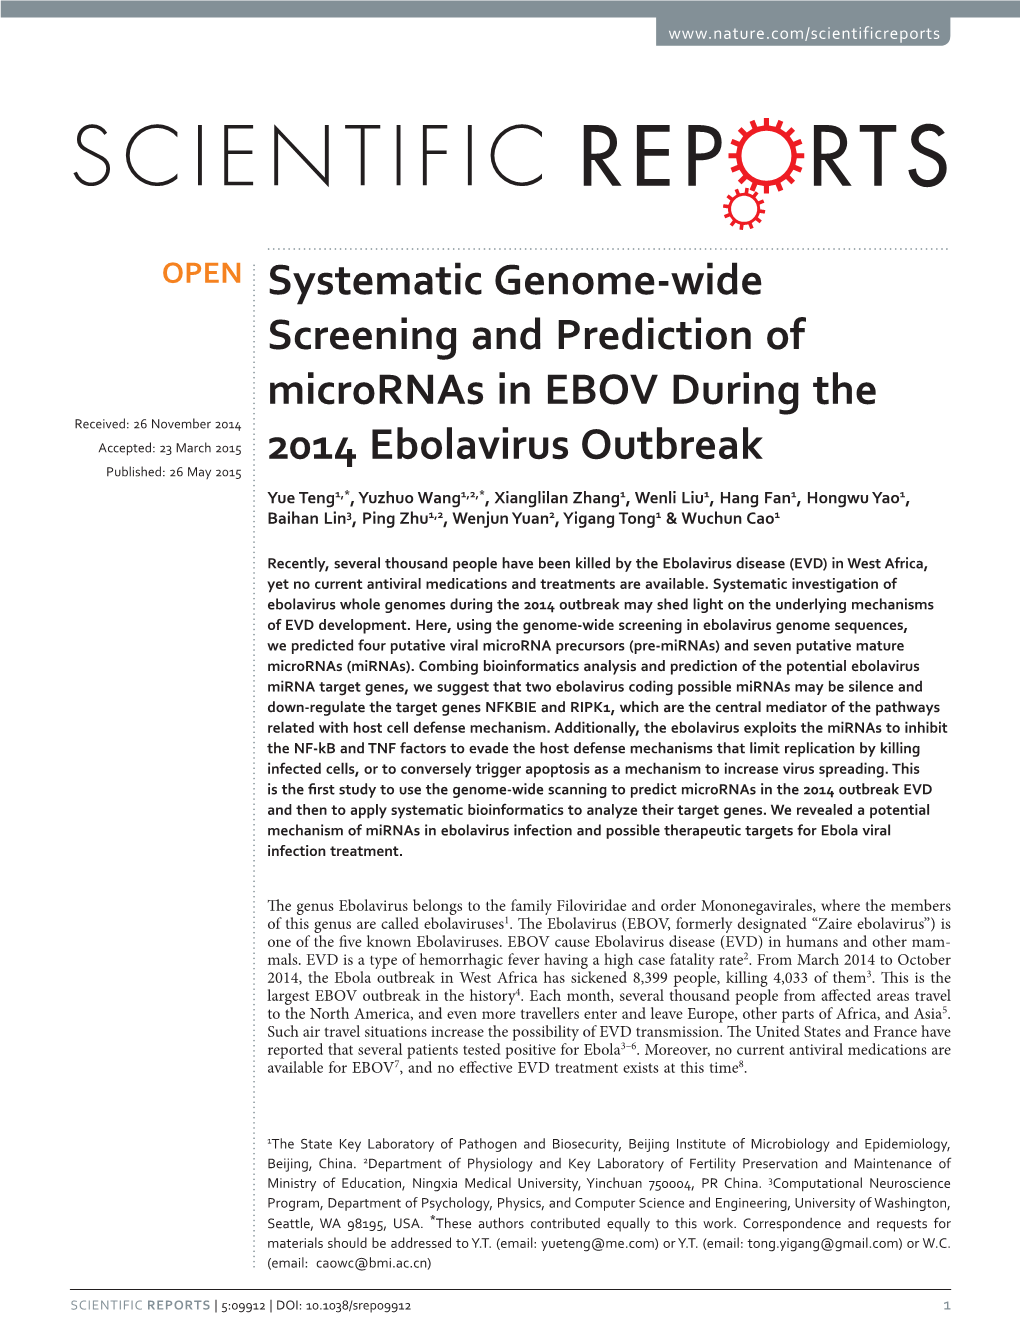 Systematic Genome-Wide Screening and Prediction of Micrornas in EBOV During the 2014 Ebolavirus Outbreak